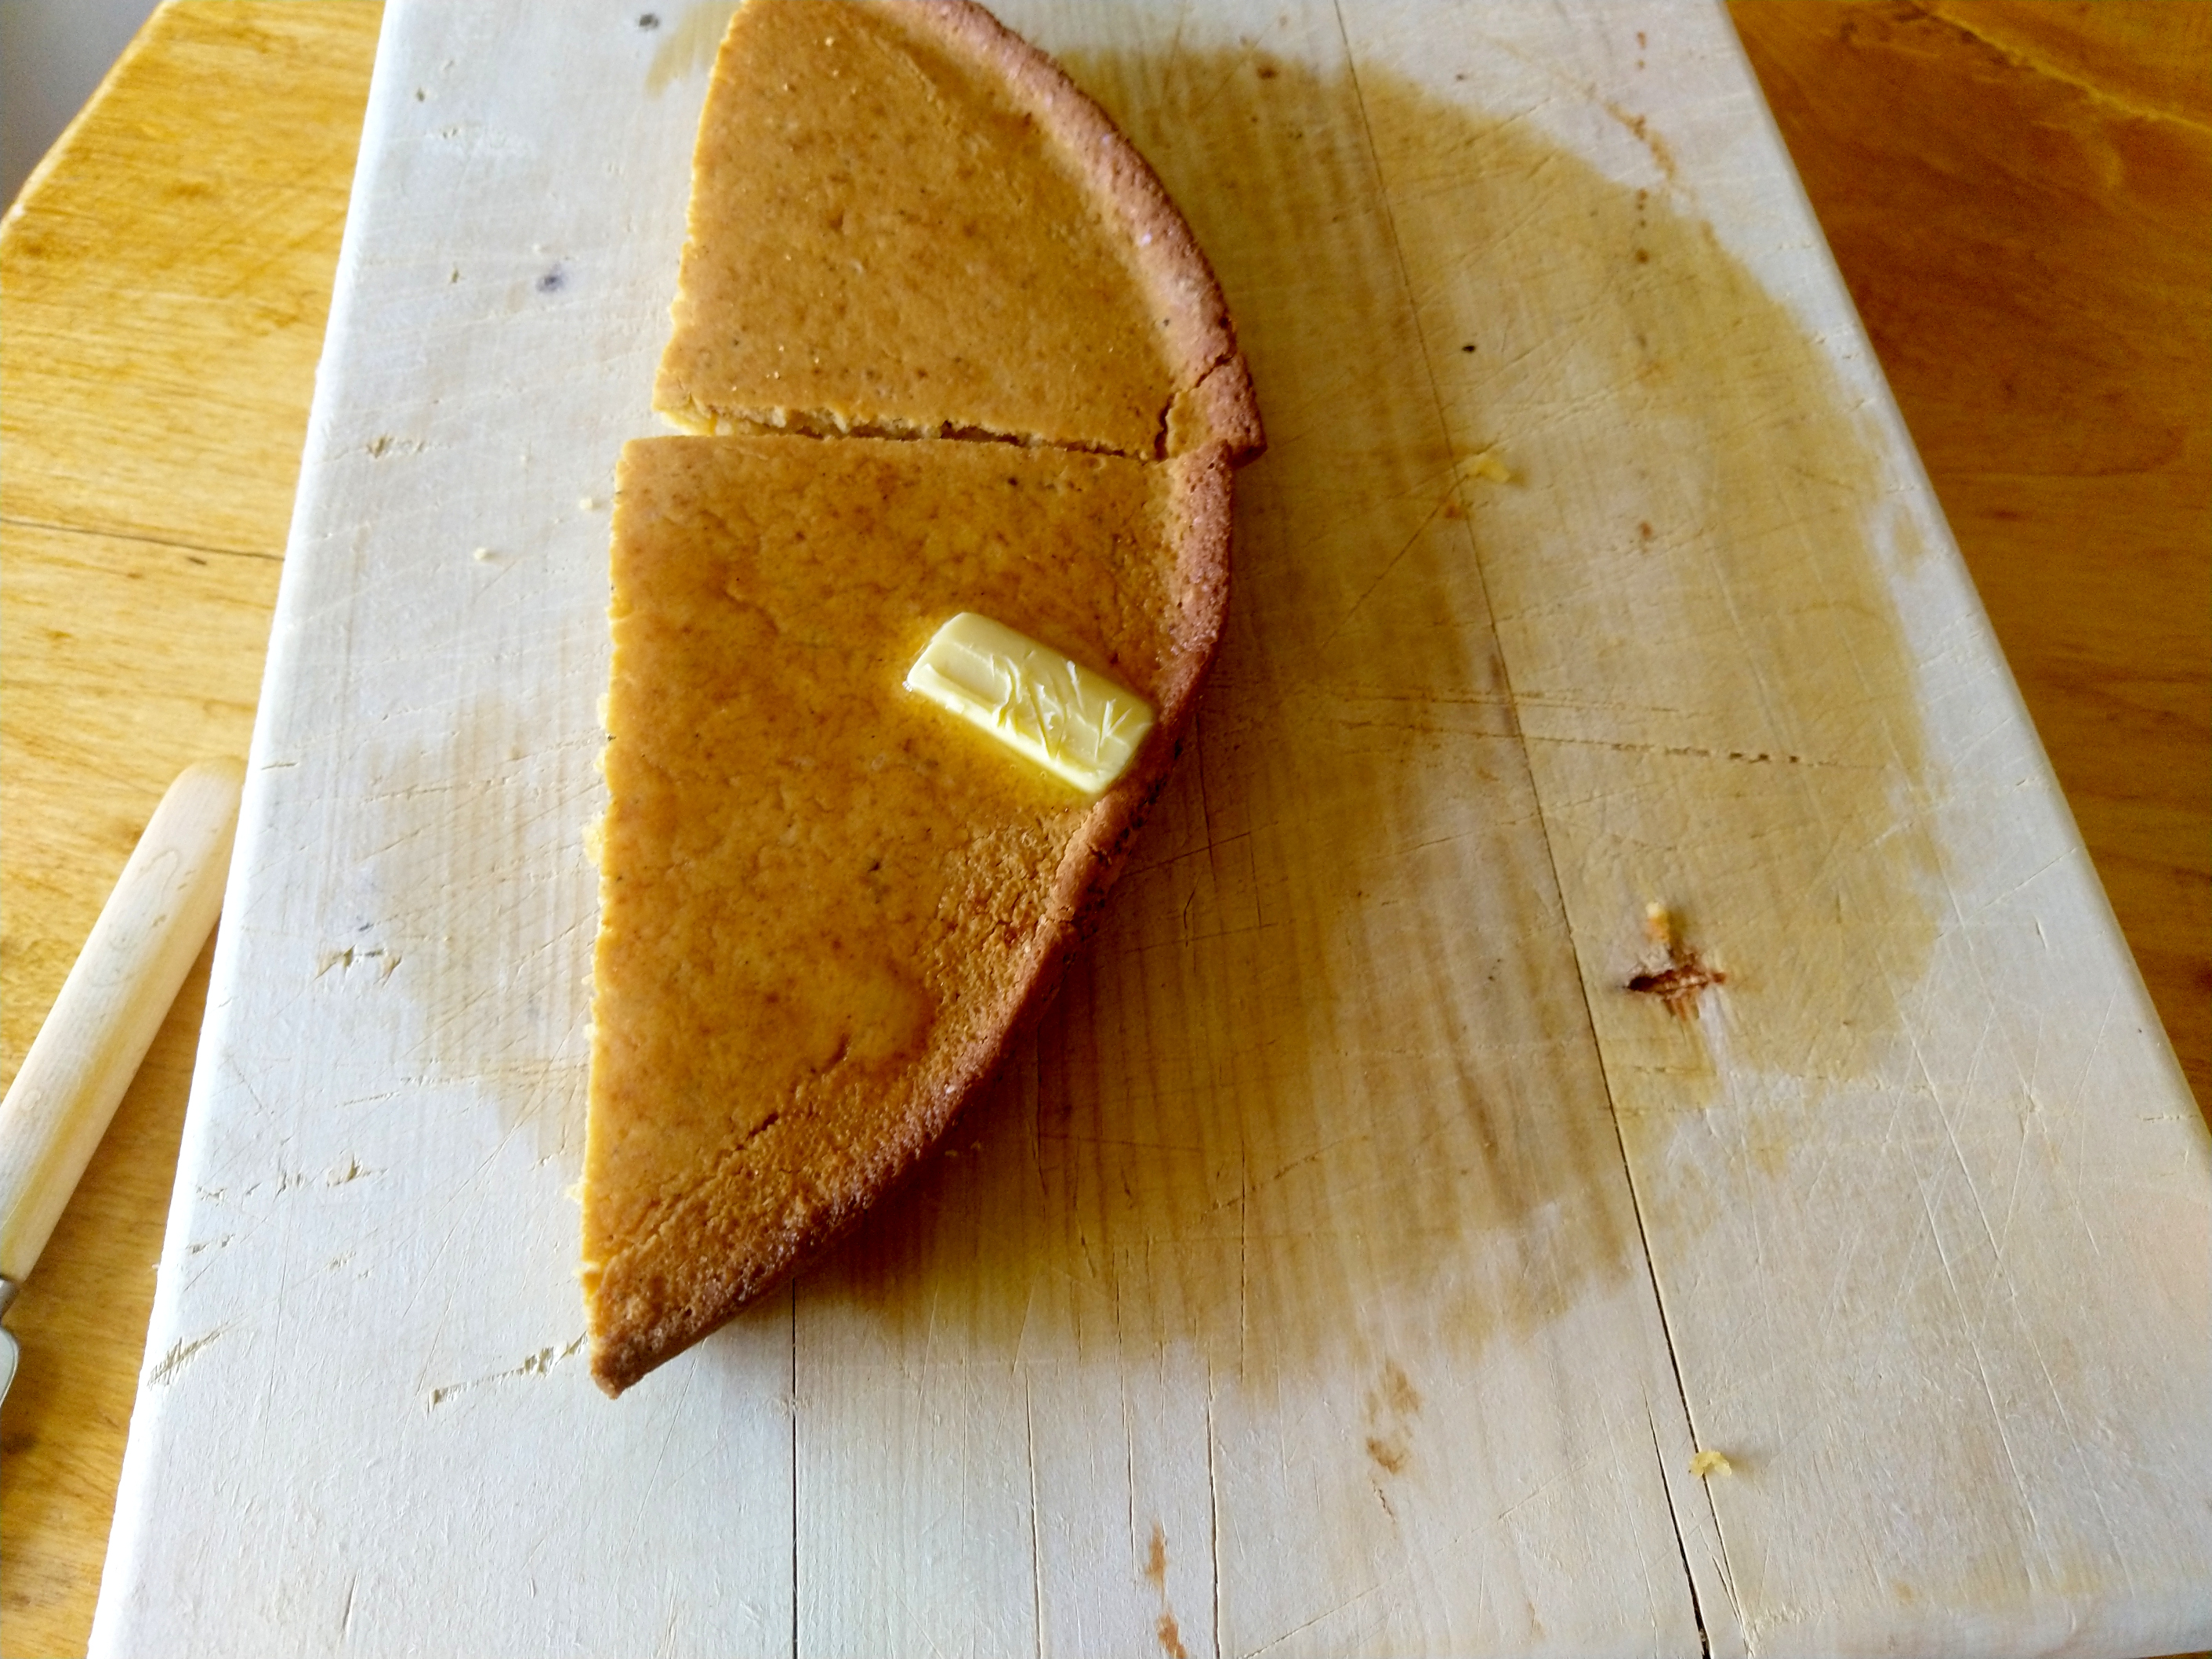 Steaming-hot, soft cornbread, slumbering contentedly on a chopping board.  A lazy dollop of butter melts upon the brown crust.  In the distance, trumpets.